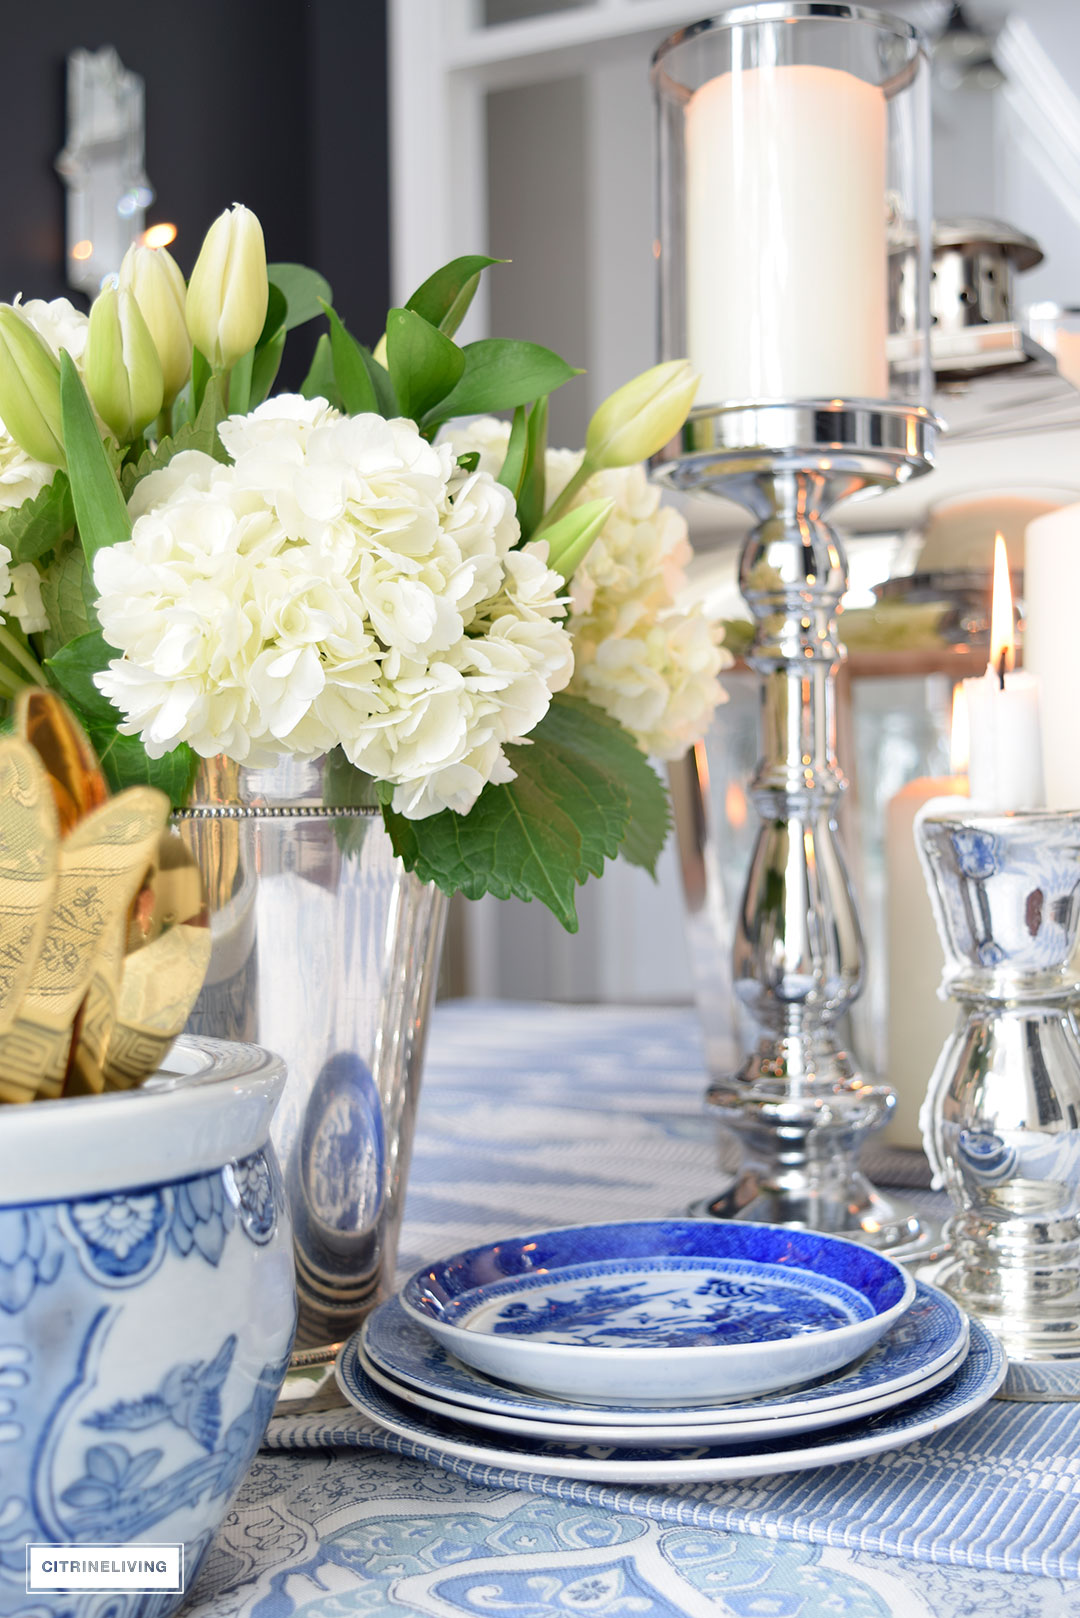 Fresh flowers and layers of blue and white pattern with silver candleholders and gold flatware is perfect for a Spring table.